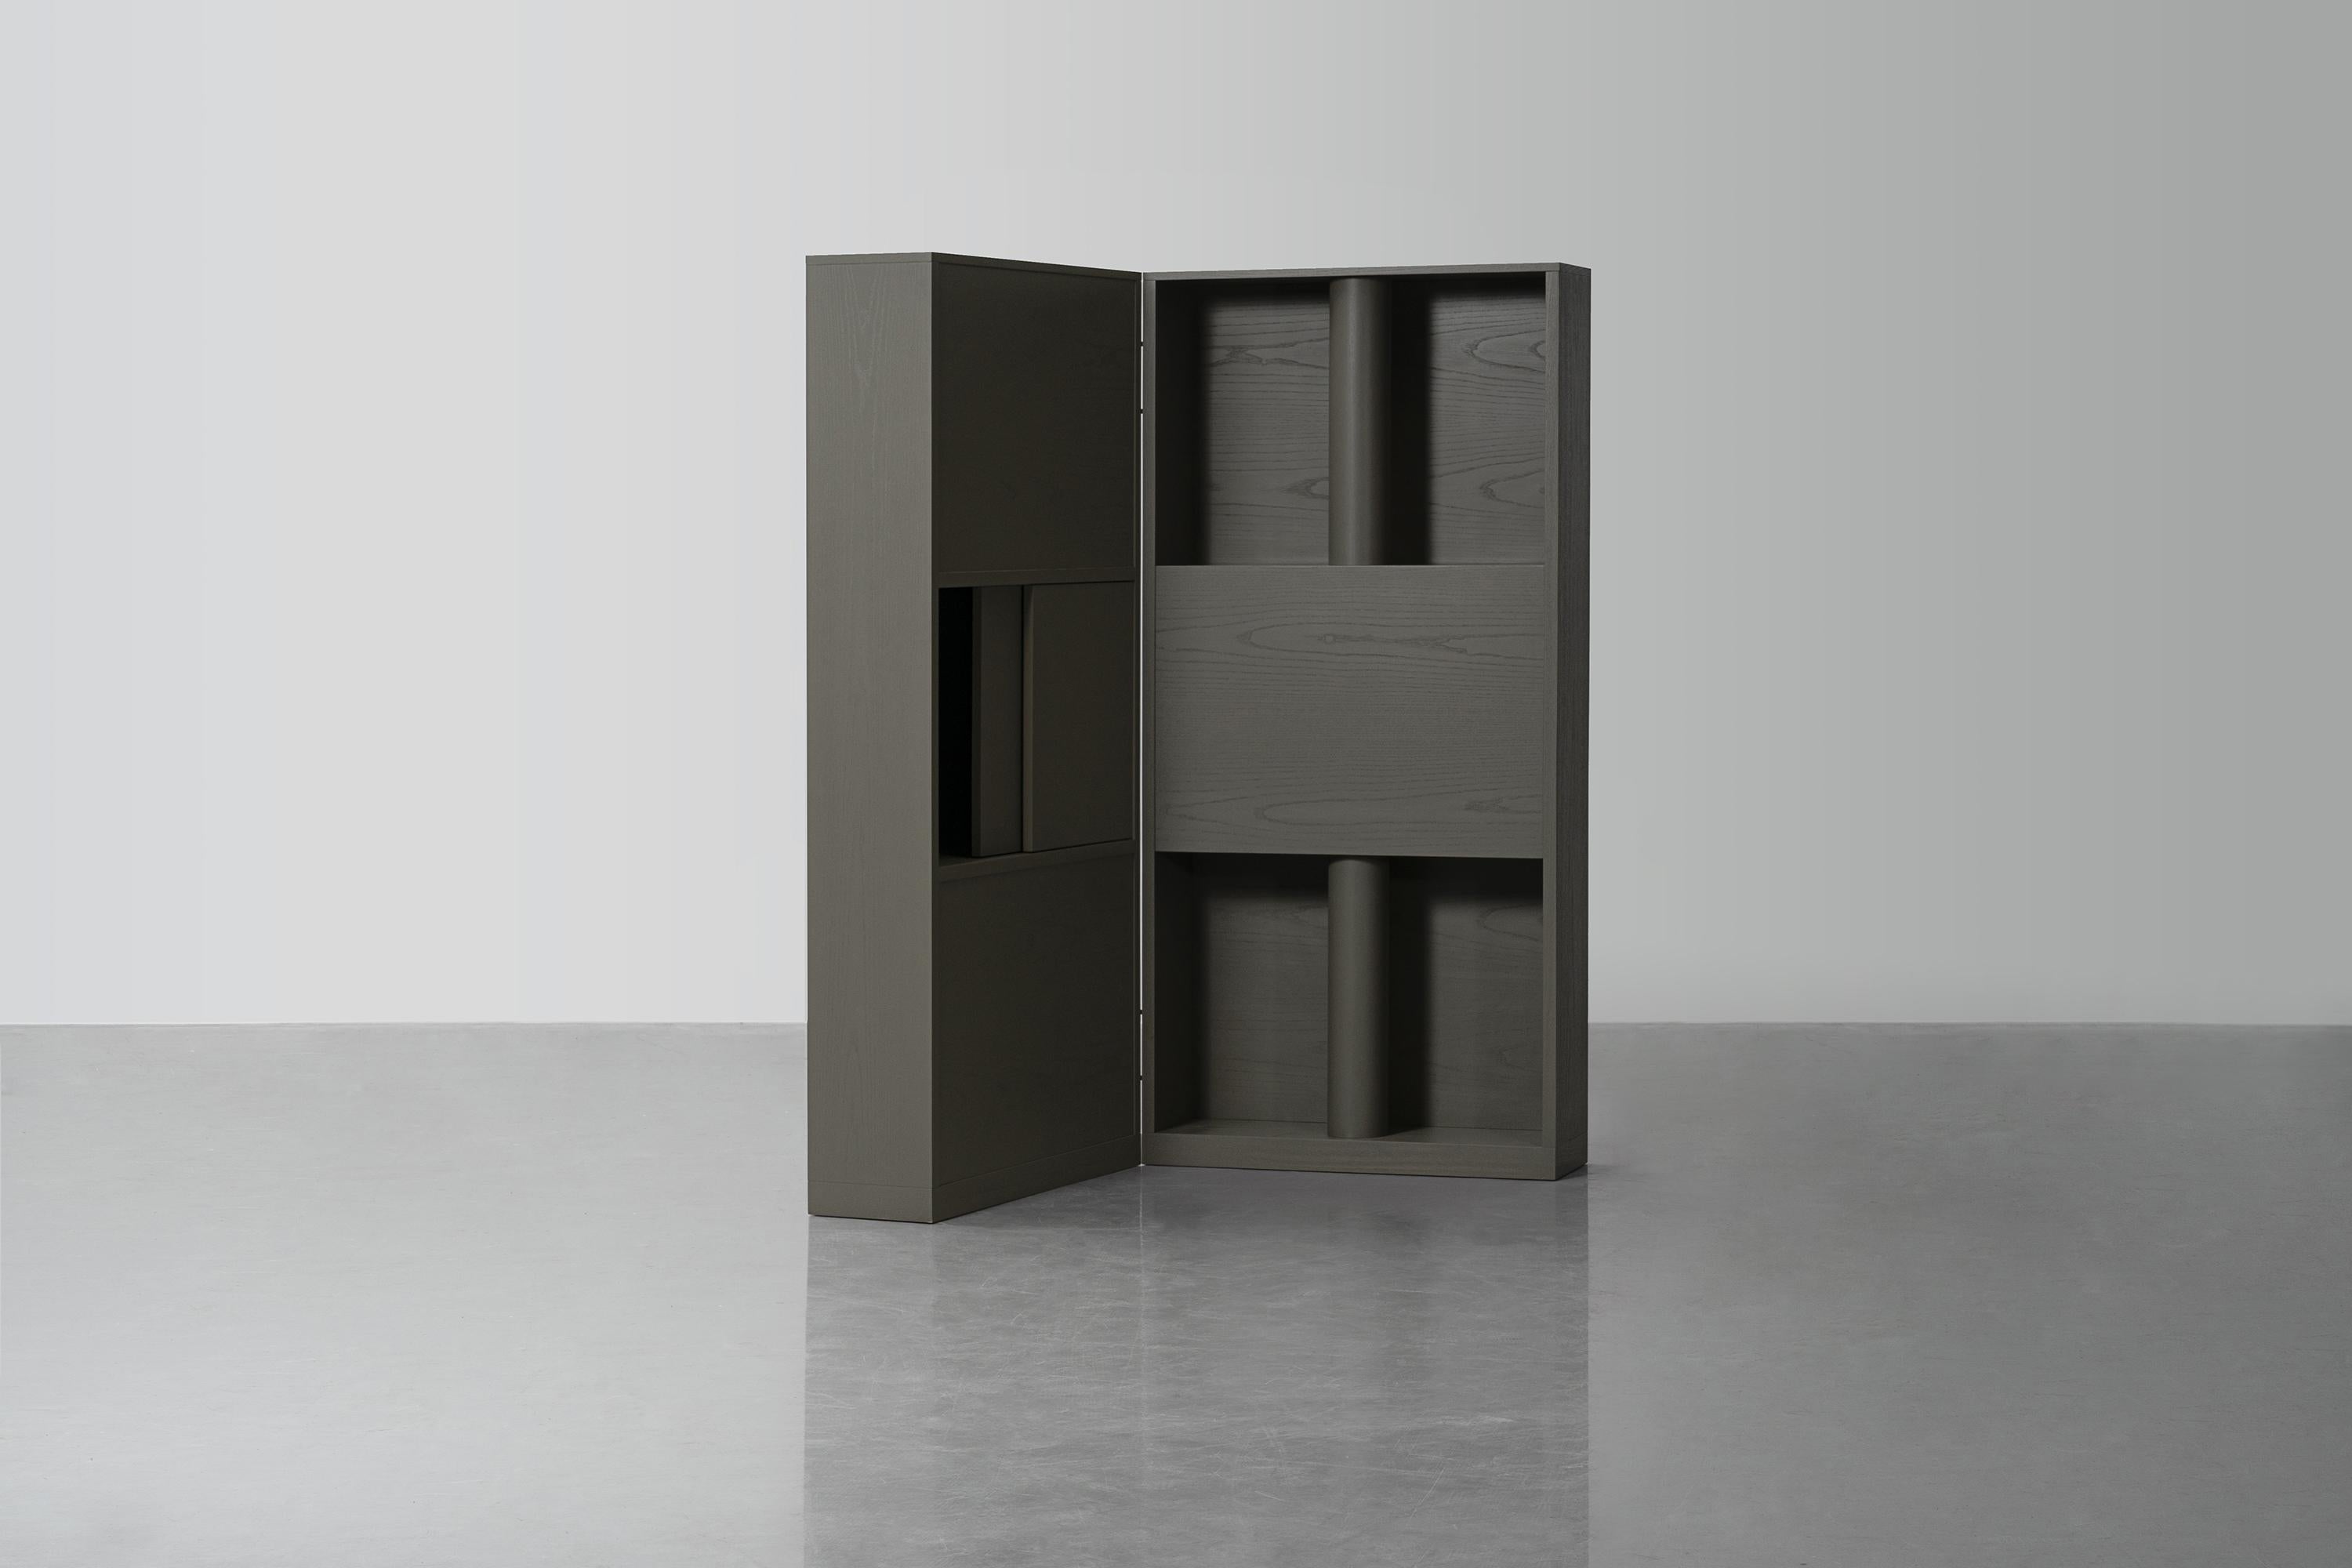 Weight of Shadow Screen Cabinet by Atelier V&F
Dimensions: Opened: D 25 x W 160 x H 168.5 cm. 
Closed: D 50 x W 80 x H 168.5 cm. 
Materials: Ash.

Available in black or grey. Please contact us.

The weightiness and the fine curves of the blocks